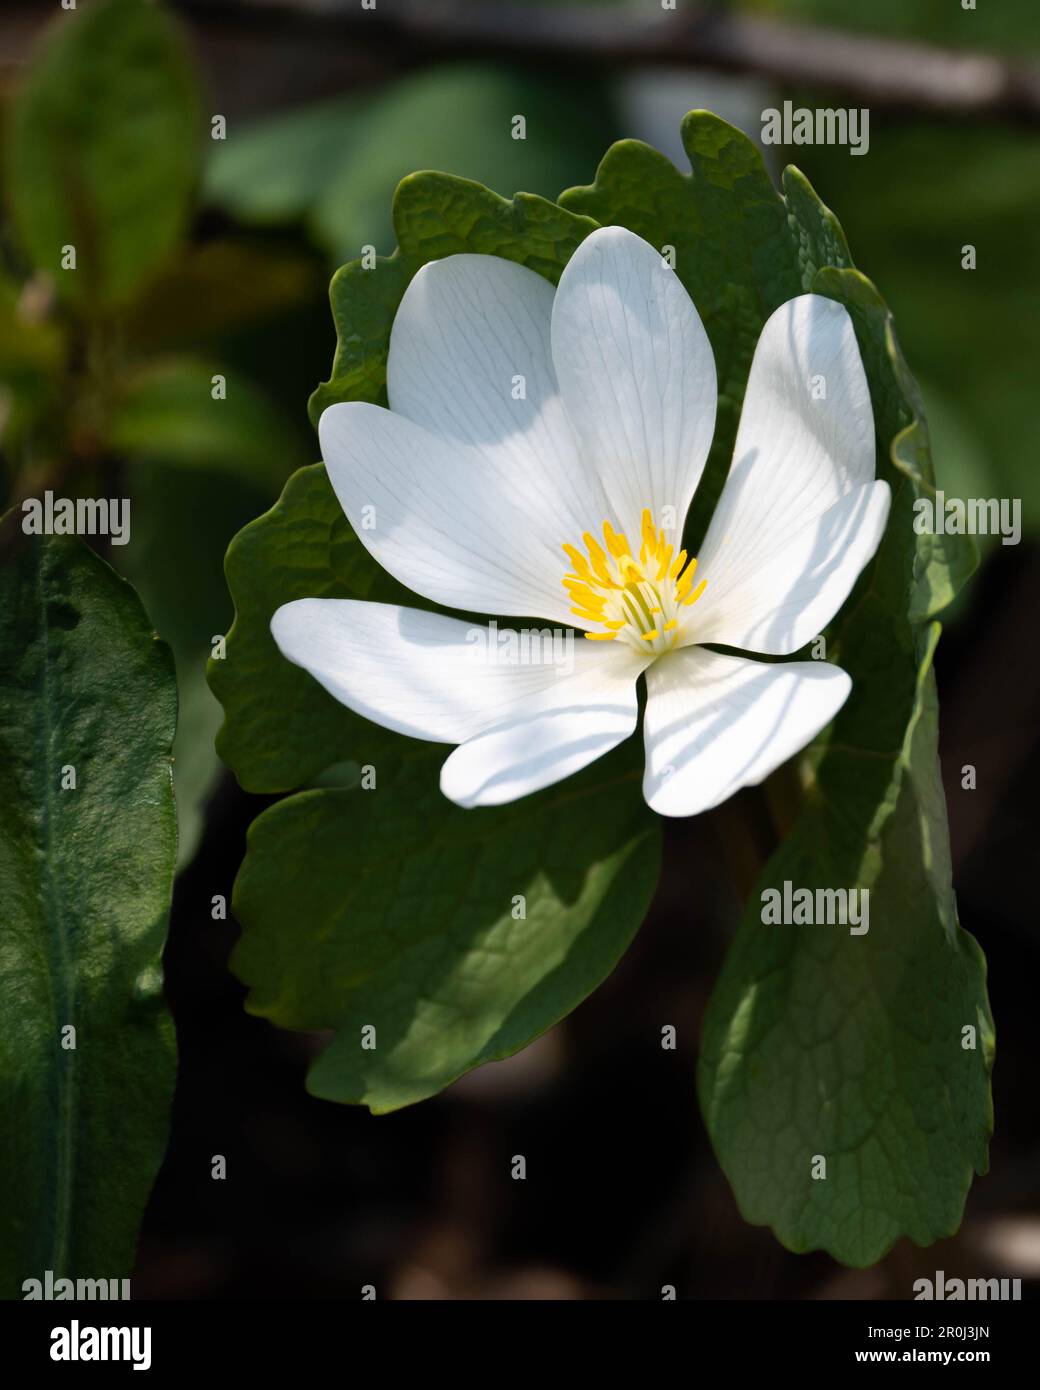 A sunlit bloodroot flower, Sanguinaria canadensis, isolated on a dark shadow leaf background in the early spring in the Adirondack Mountains, NY USA Stock Photo